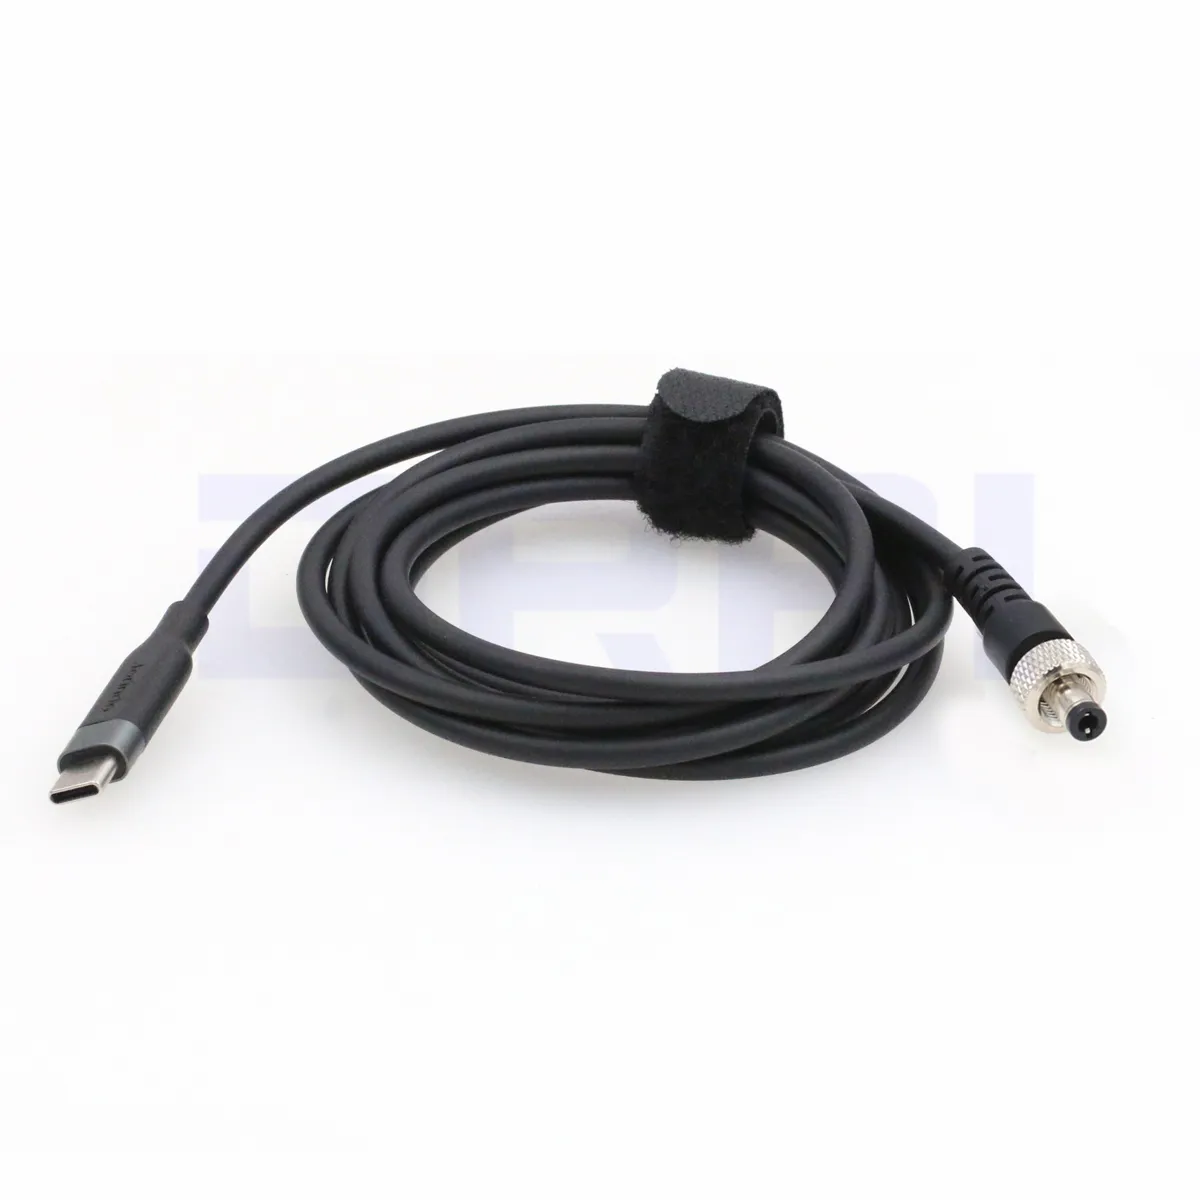 Locking 5.5 X2.1mm DC to USB-C PD 12V Power cable for Atomos Ninja V monitor/ Zwo ASI cooled cameras